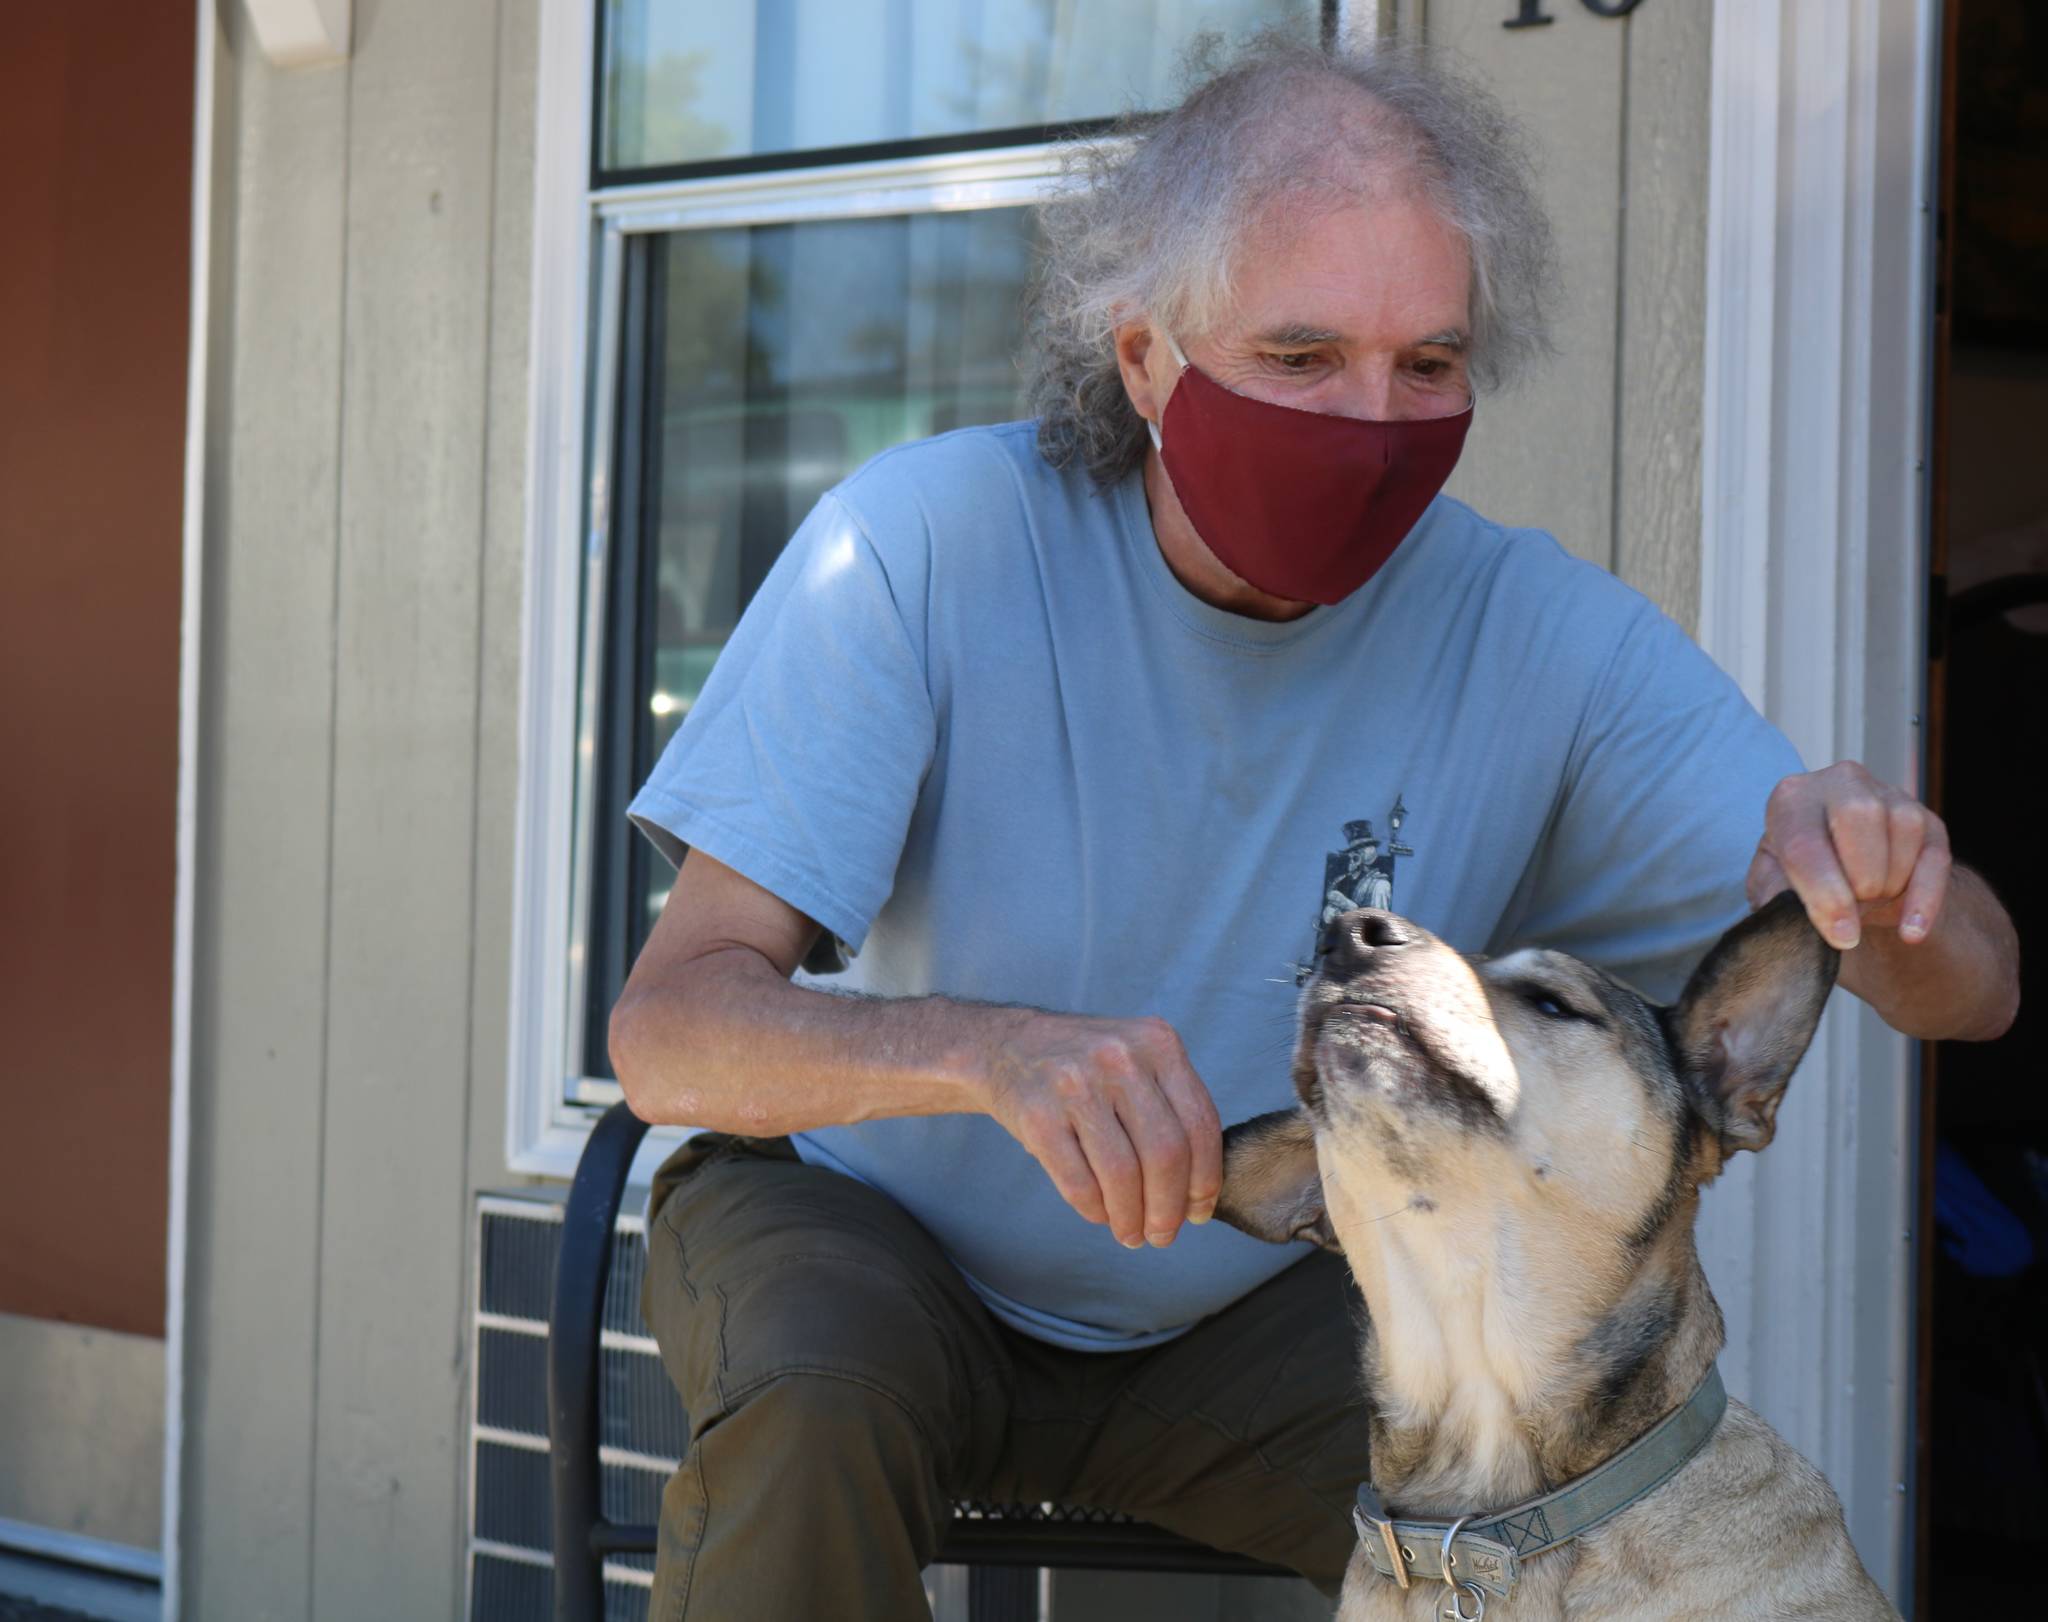 Robert Allen, 61, and his dog Jaxx have been living at the North Bend Motel since March, as part of a voucher program from Snoqualmie Valley Shelter Services. The stability a simple motel room provides is allowing Allen to heal from numerous injuries, and highlights the importance of providing shelter. Aaron Kunkler/staff photo